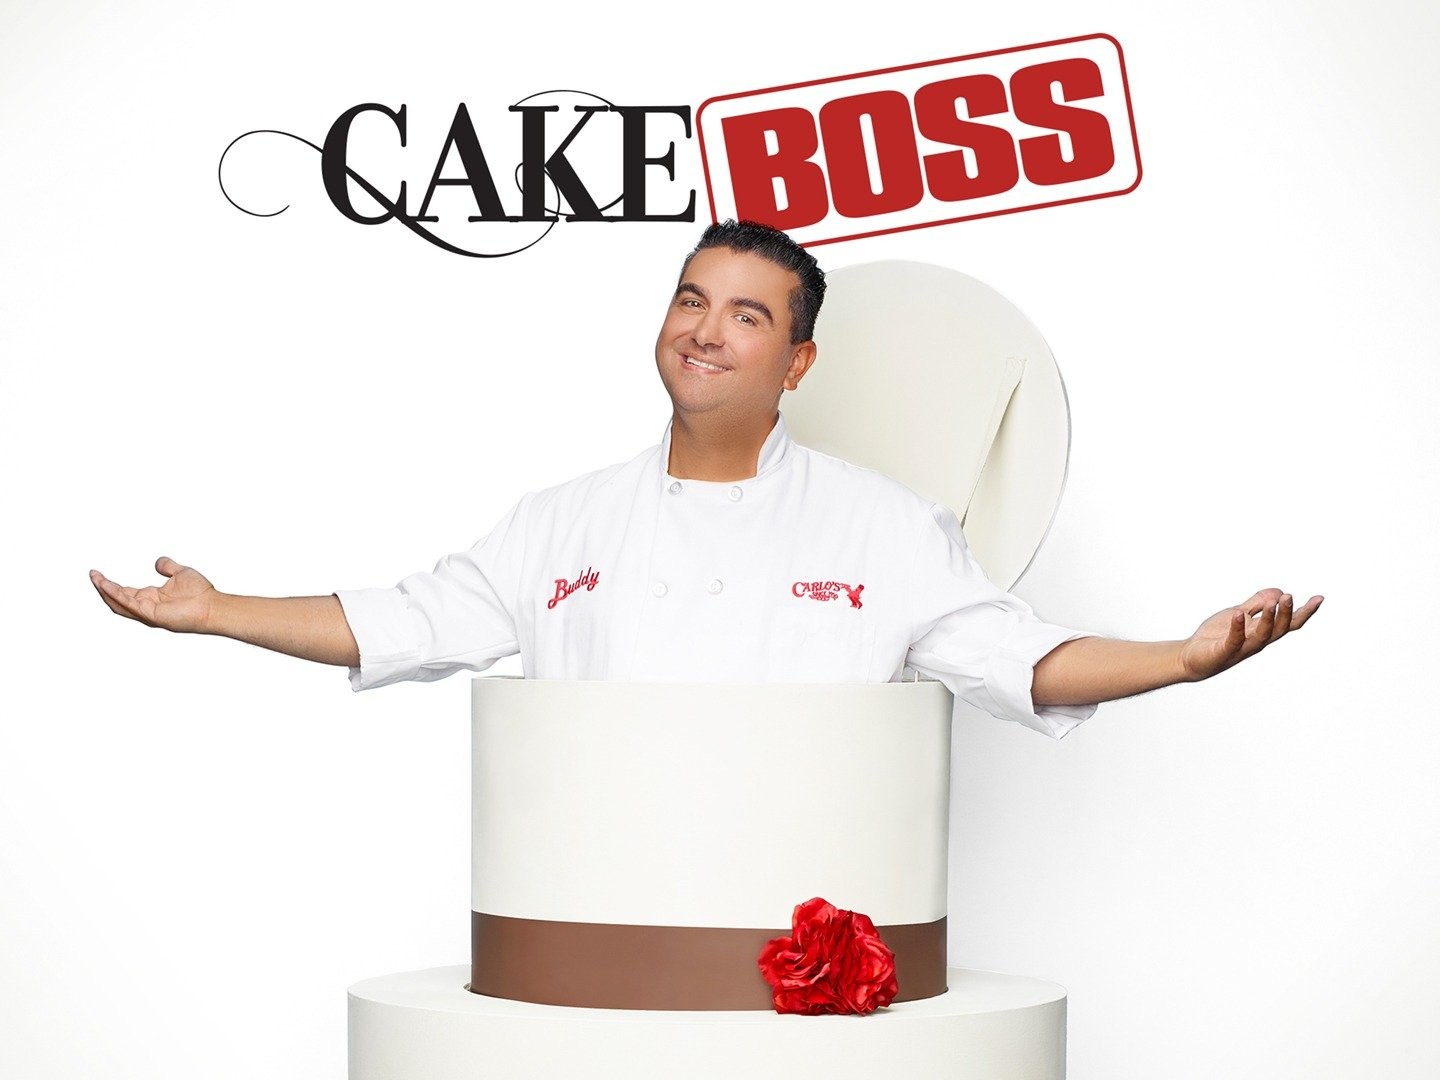 Amazon.com: Carlo's Cake Boss Vanilla Rainbow Cake, Small 6” Size - Serves  6 to 8 - Birthday Cakes and Treats for Delivery - Ideal Gift for Women, Men  and Kids - Baked